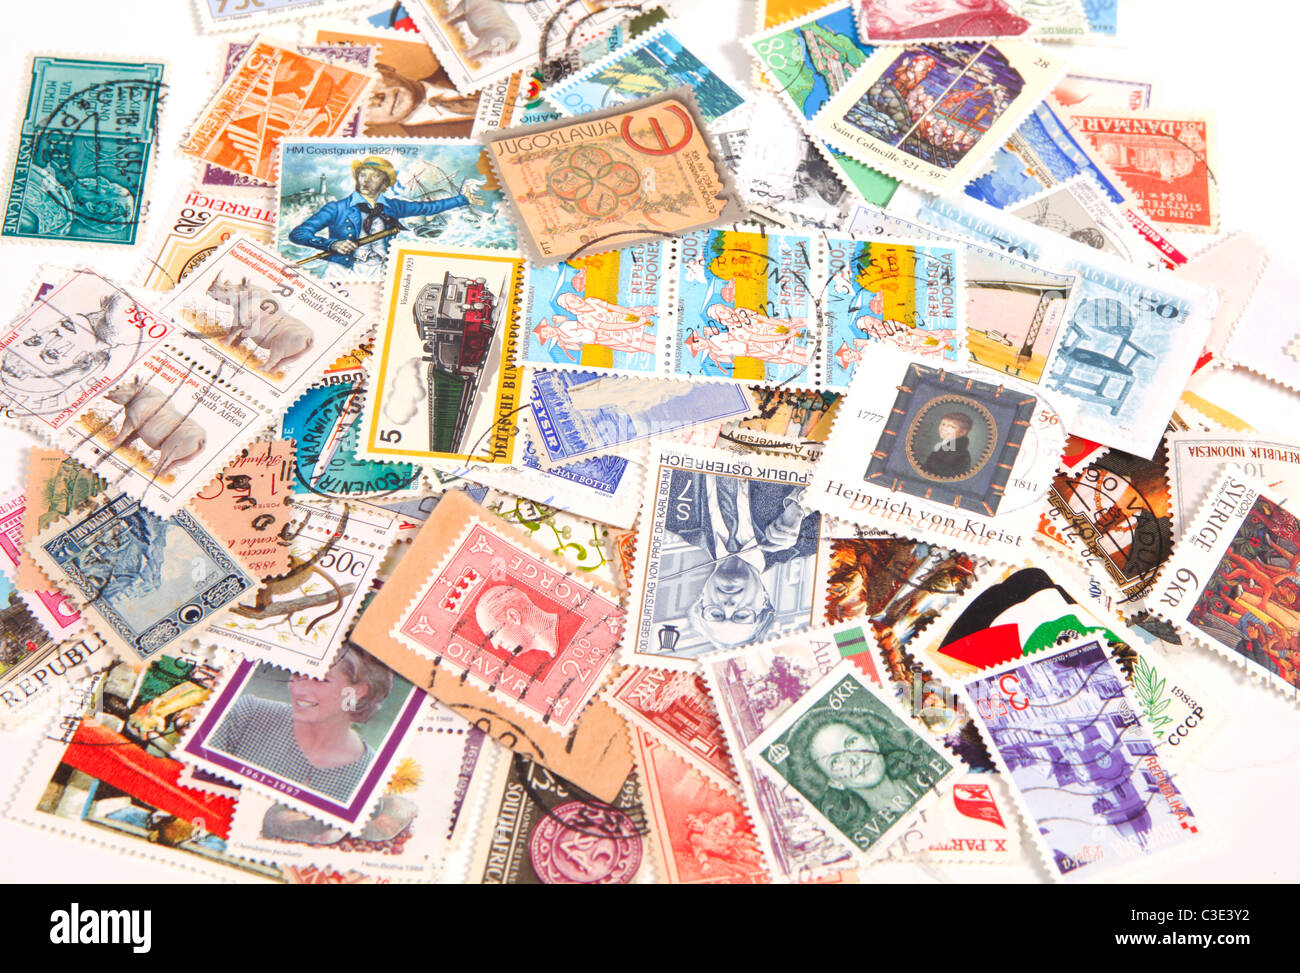 98 International Stamps All Over World Stock Photo 10411636